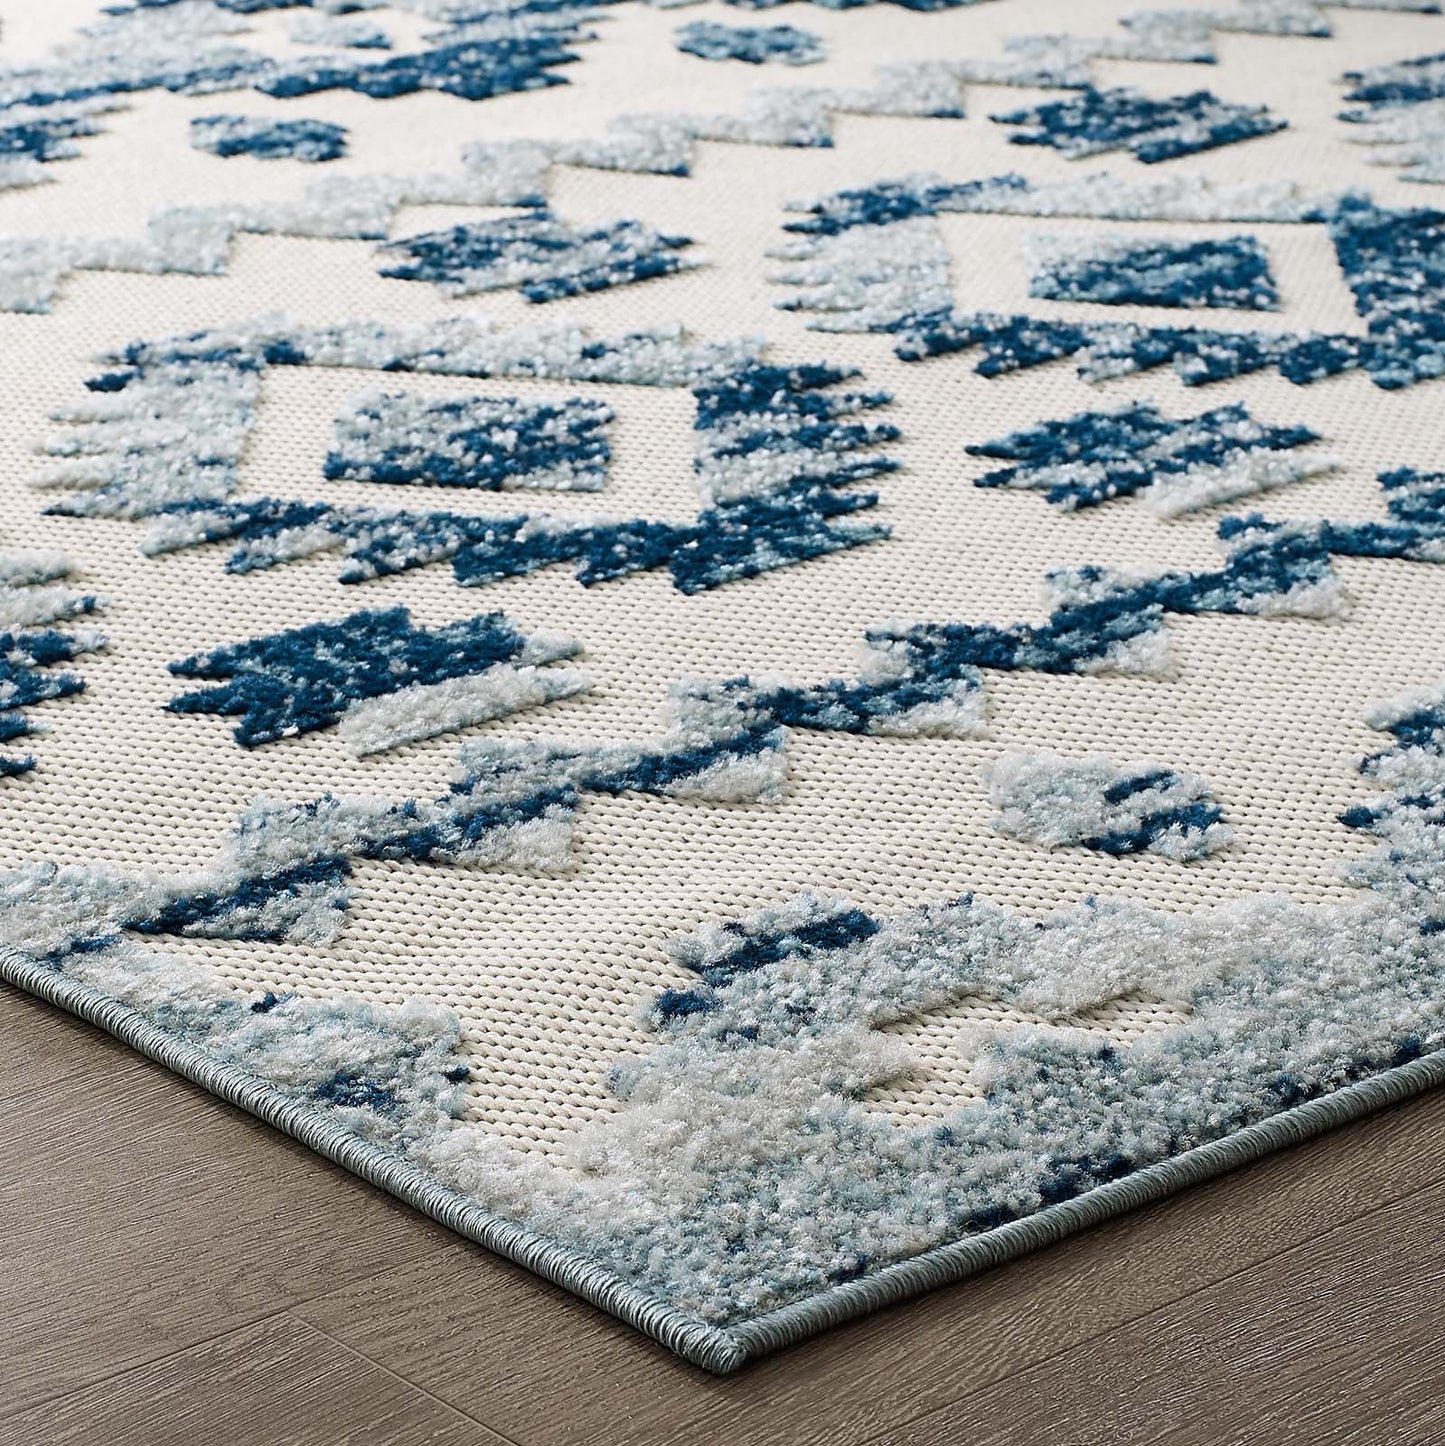 Reflect Takara Abstract Diamond Moroccan Trellis 8x10 Indoor and Outdoor Area Rug Ivory and Blue R-1180A-810